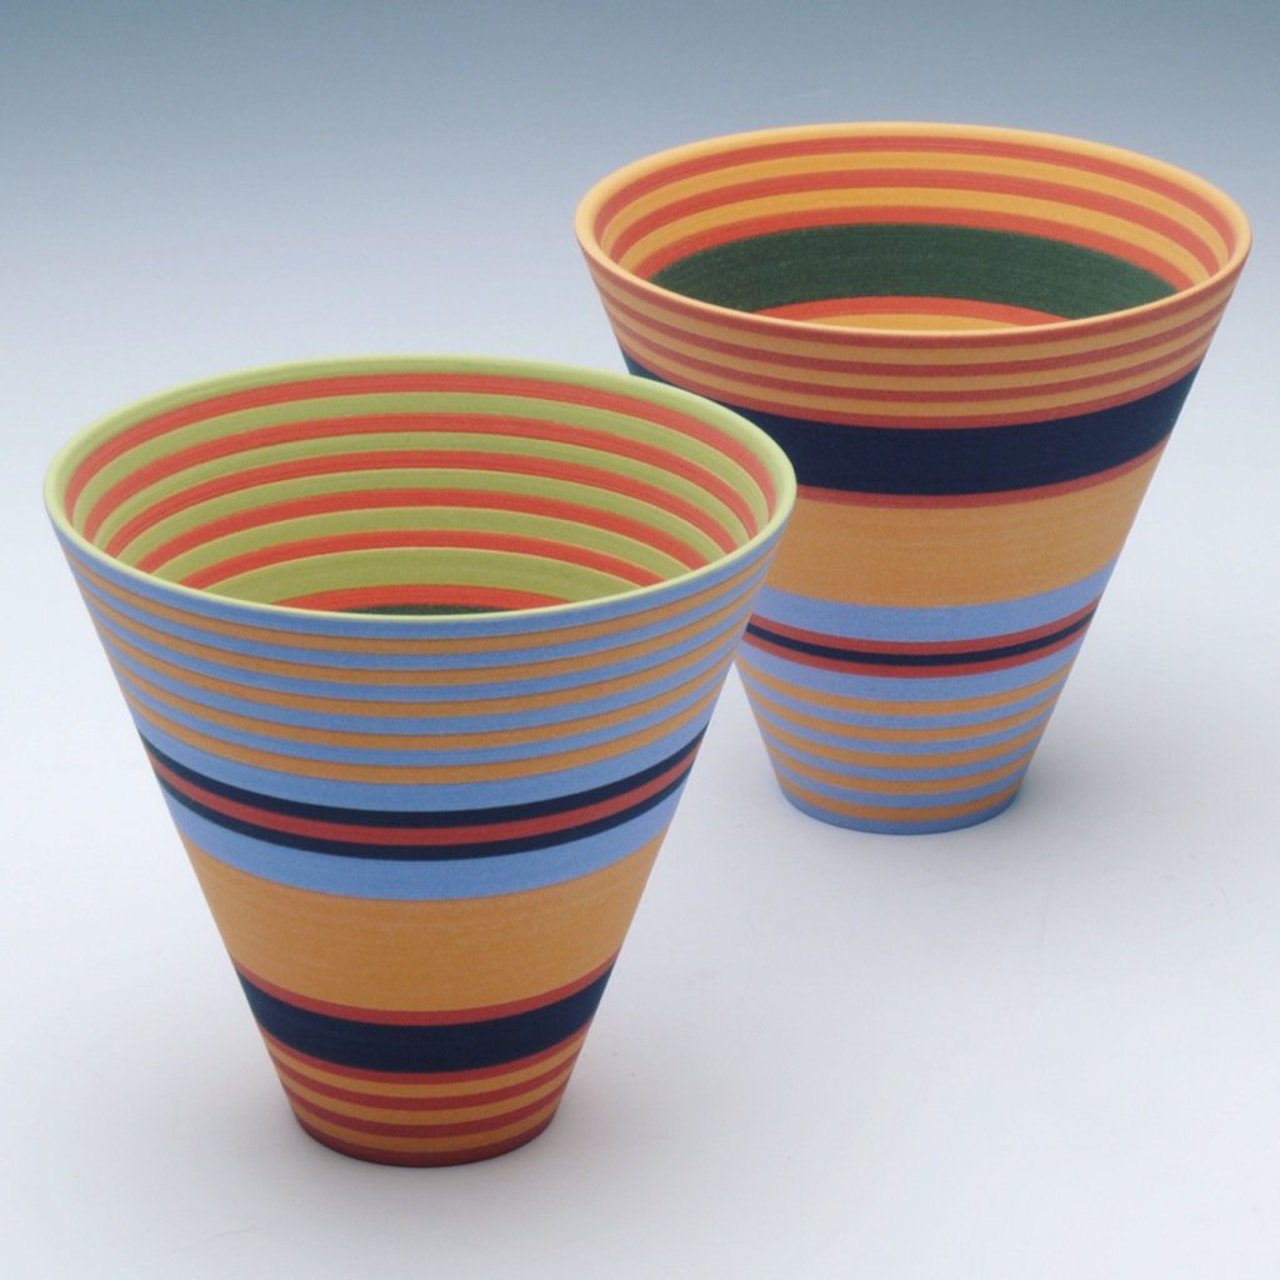 Coming soon to Snug #HebdenBridge... The beautifully vibrant #ceramics of Sara Moorhouse. Launch: 1st & 2nd of July. https://t.co/uS9T4oKRWG